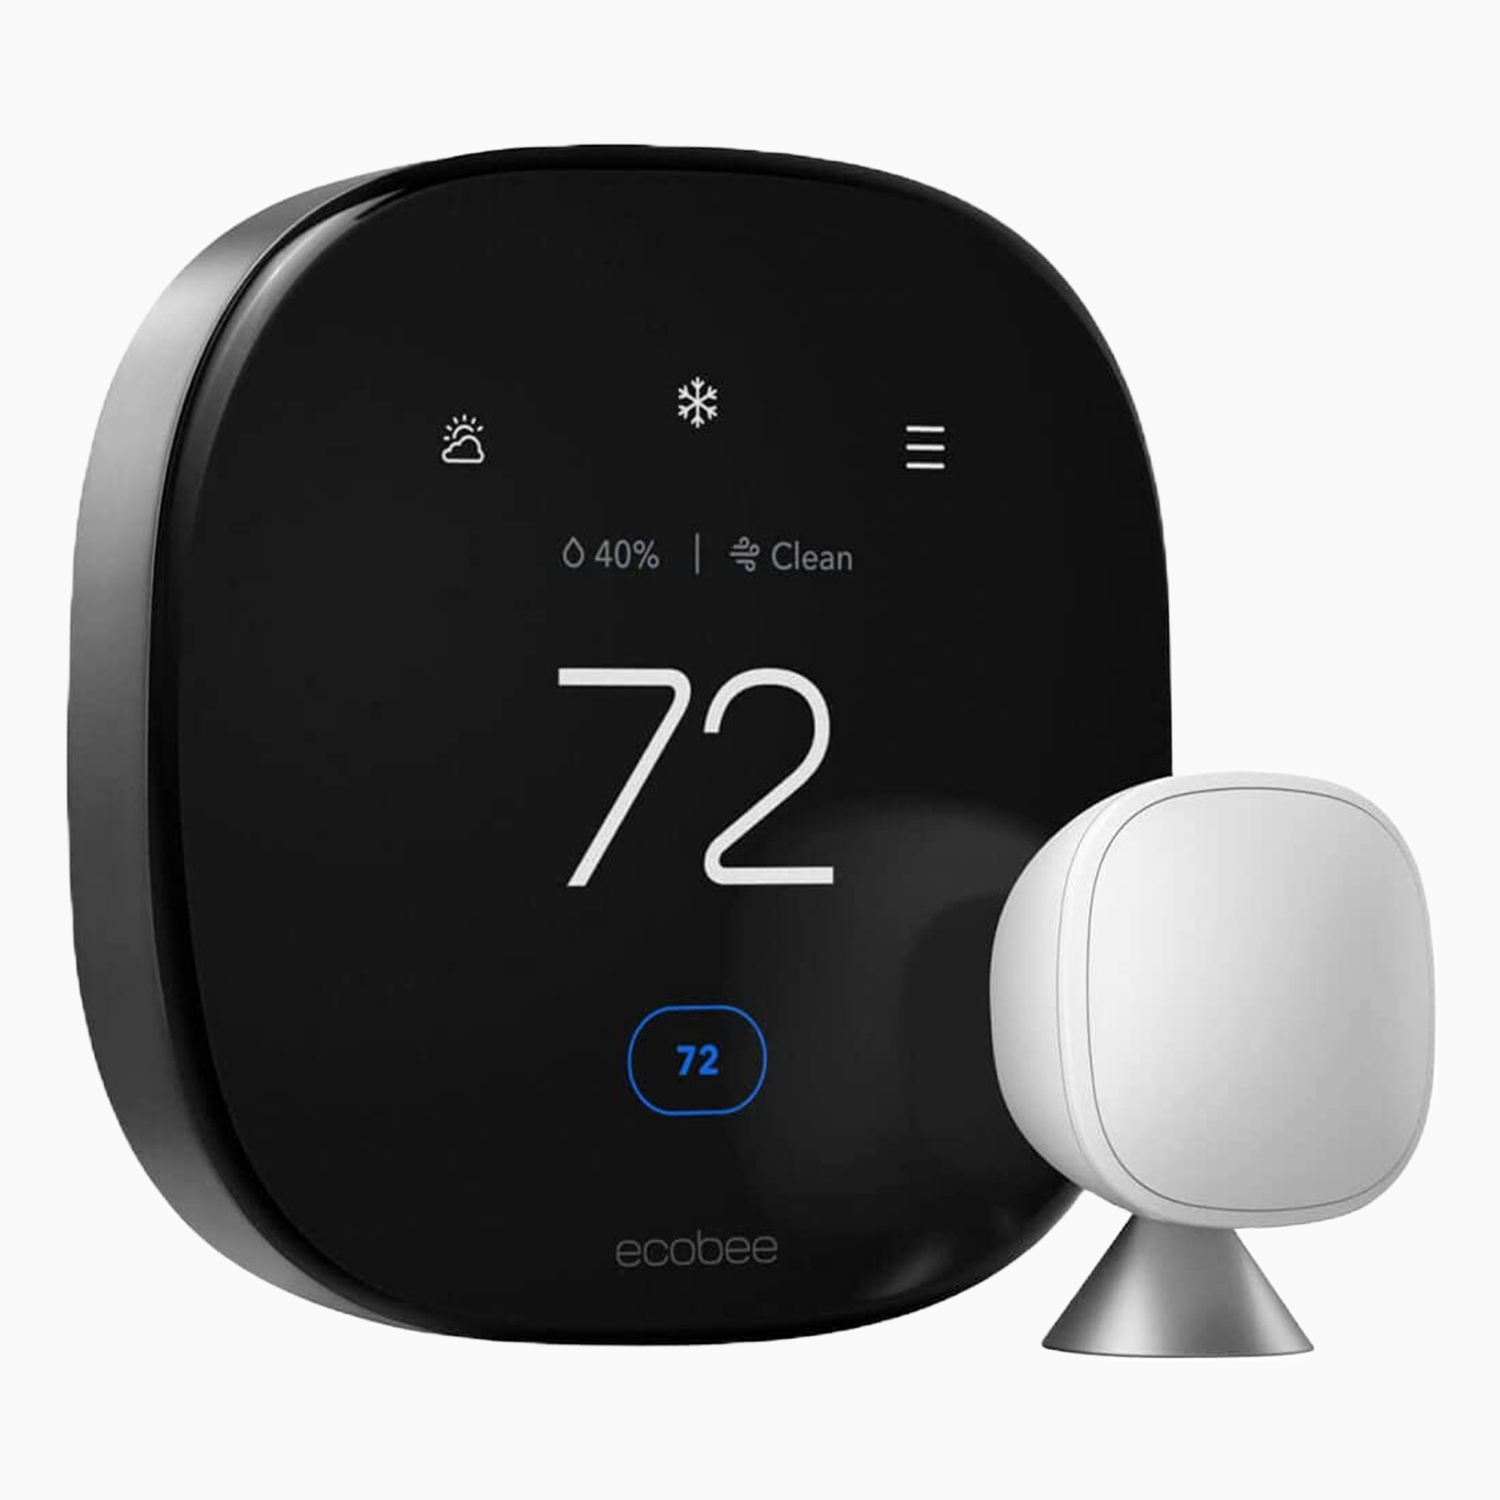 HGG22 hometech ecobee smart thermostat The Verge’s 2022 home tech holiday gift guide